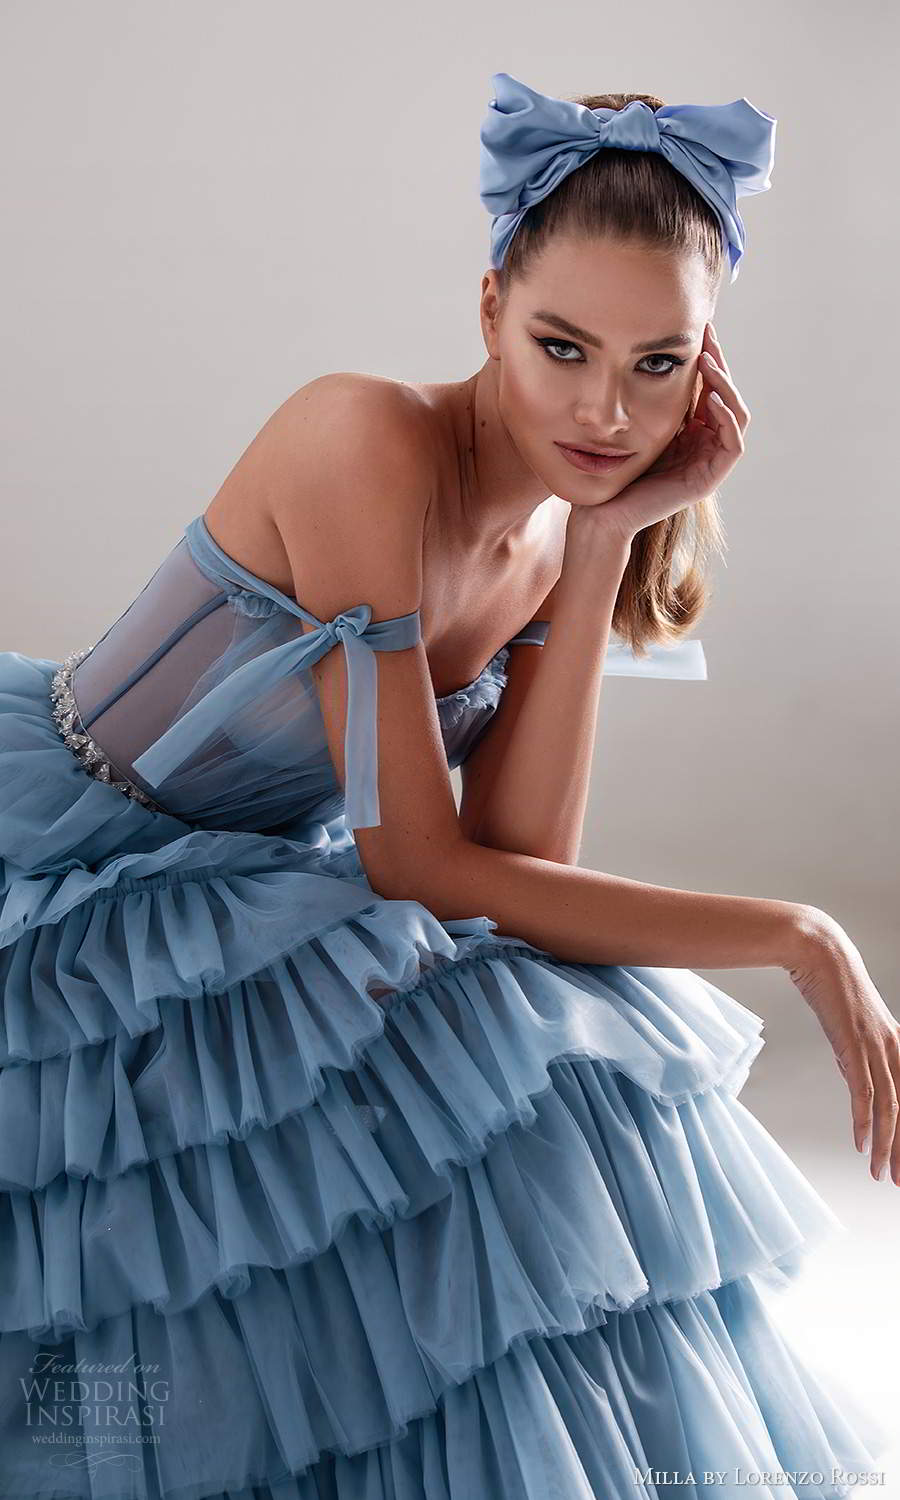 milla by lorenzo rossi 2020 rtw sleeveless straps sweetheart neckline ruched bodicea a line ball gown wedding dress ruffle tier skirt light blue color (10) zsv